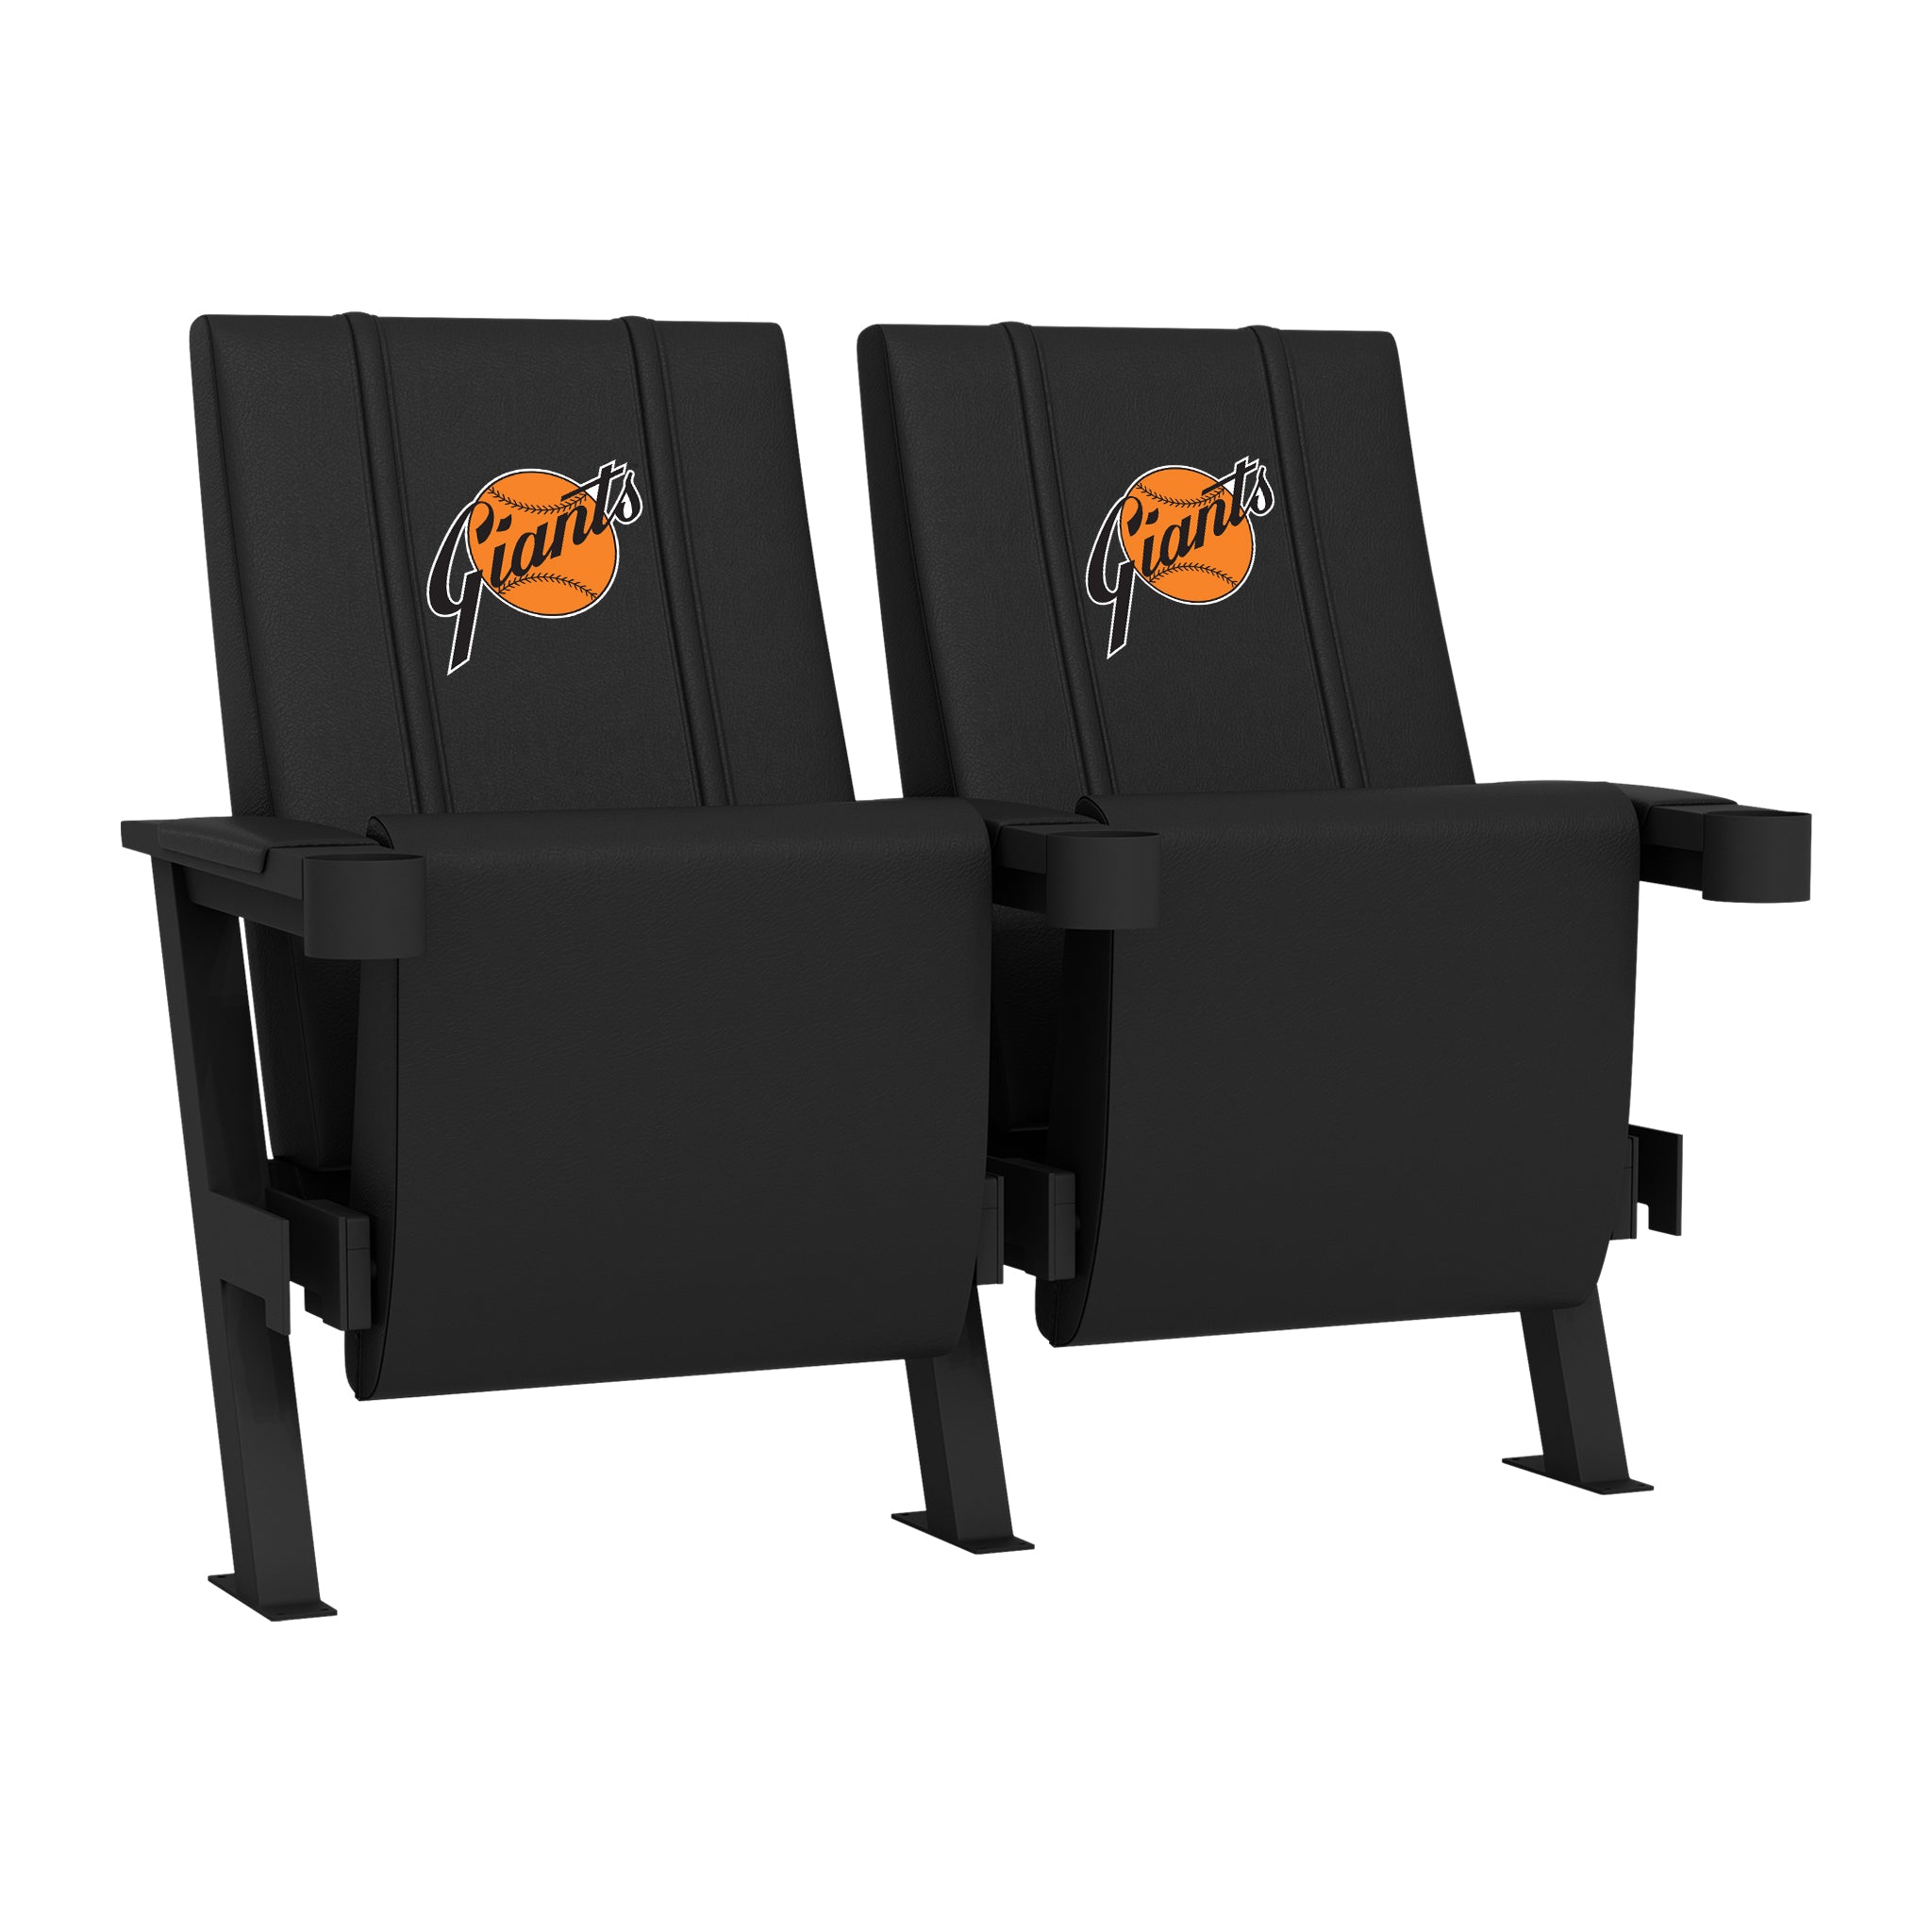 SuiteMax 3.5 VIP Seats with San Francisco Giants Cooperstown Logo